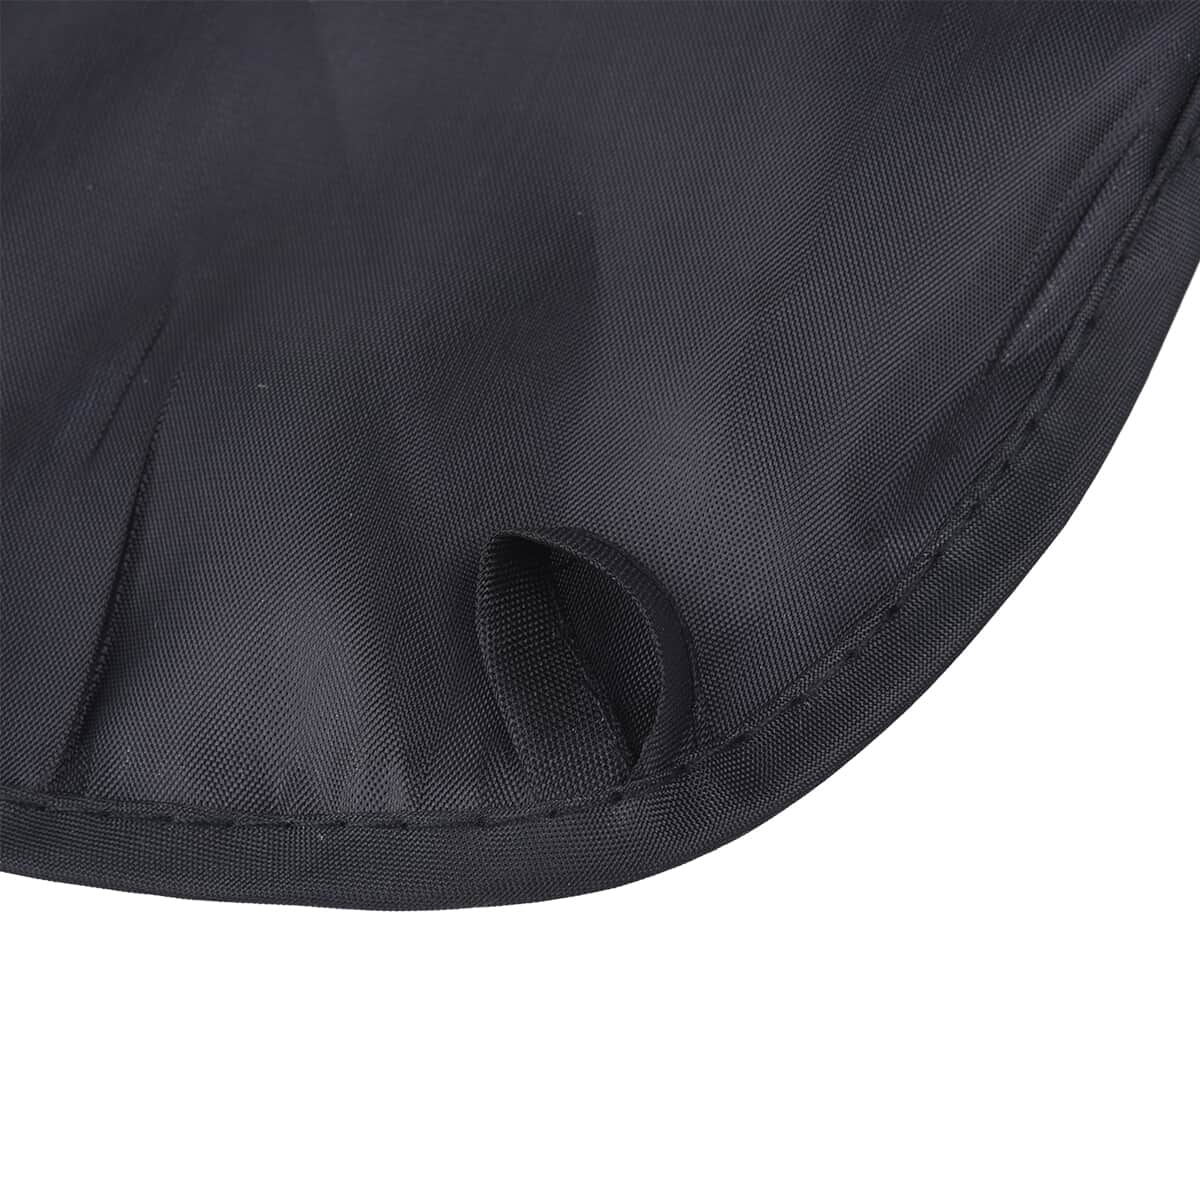 Male Beard Apron with 2 Suction Cup - Black (29"x43.3") image number 5